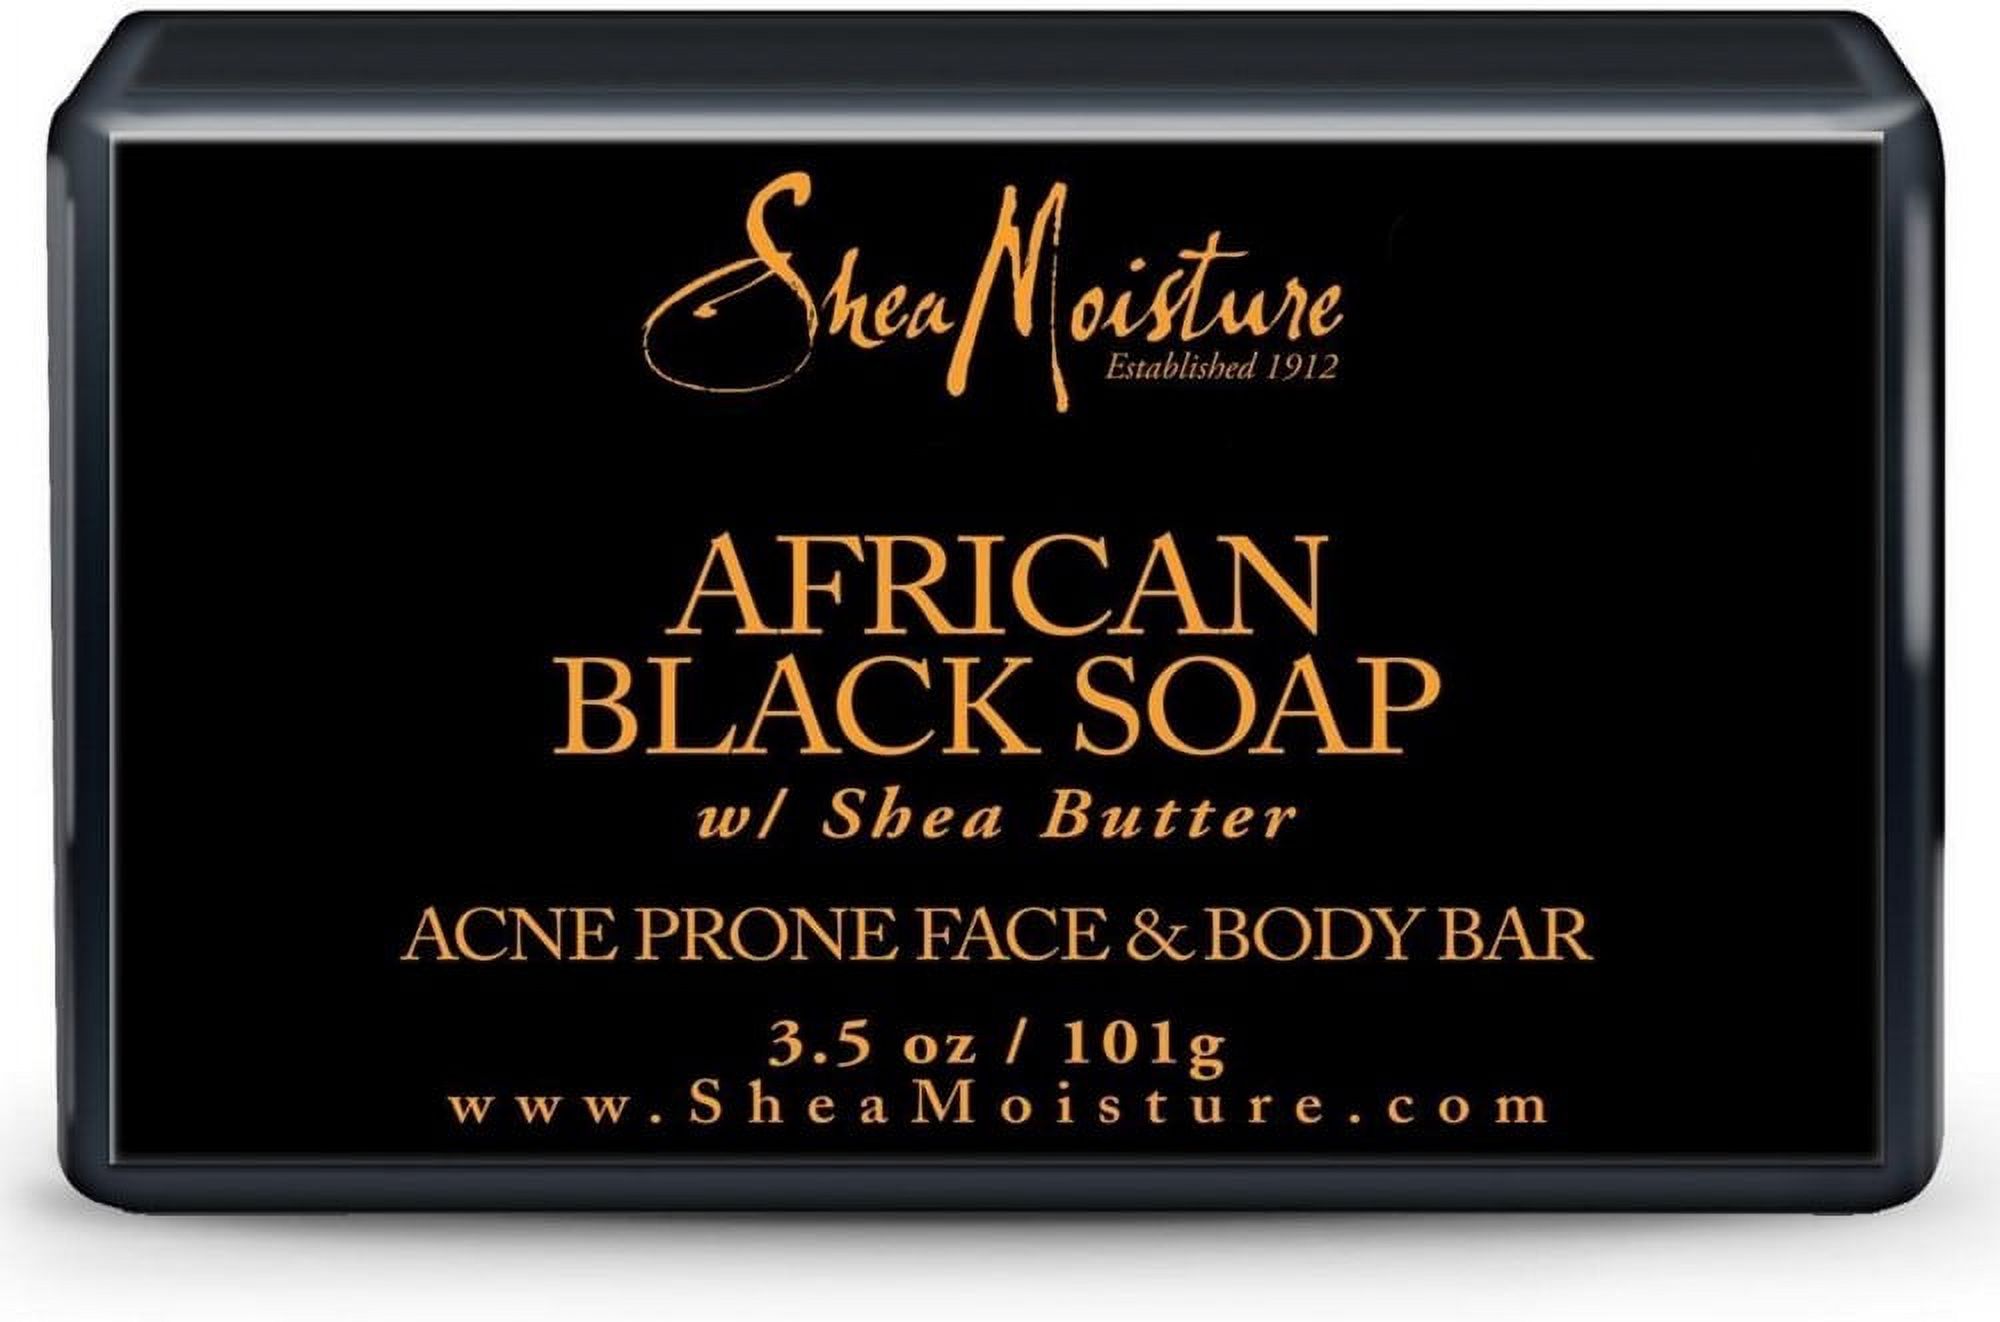 Shea Moisture African Black Soap Facial Bar Soap 3.5 oz (Pack of 6) - image 1 of 2